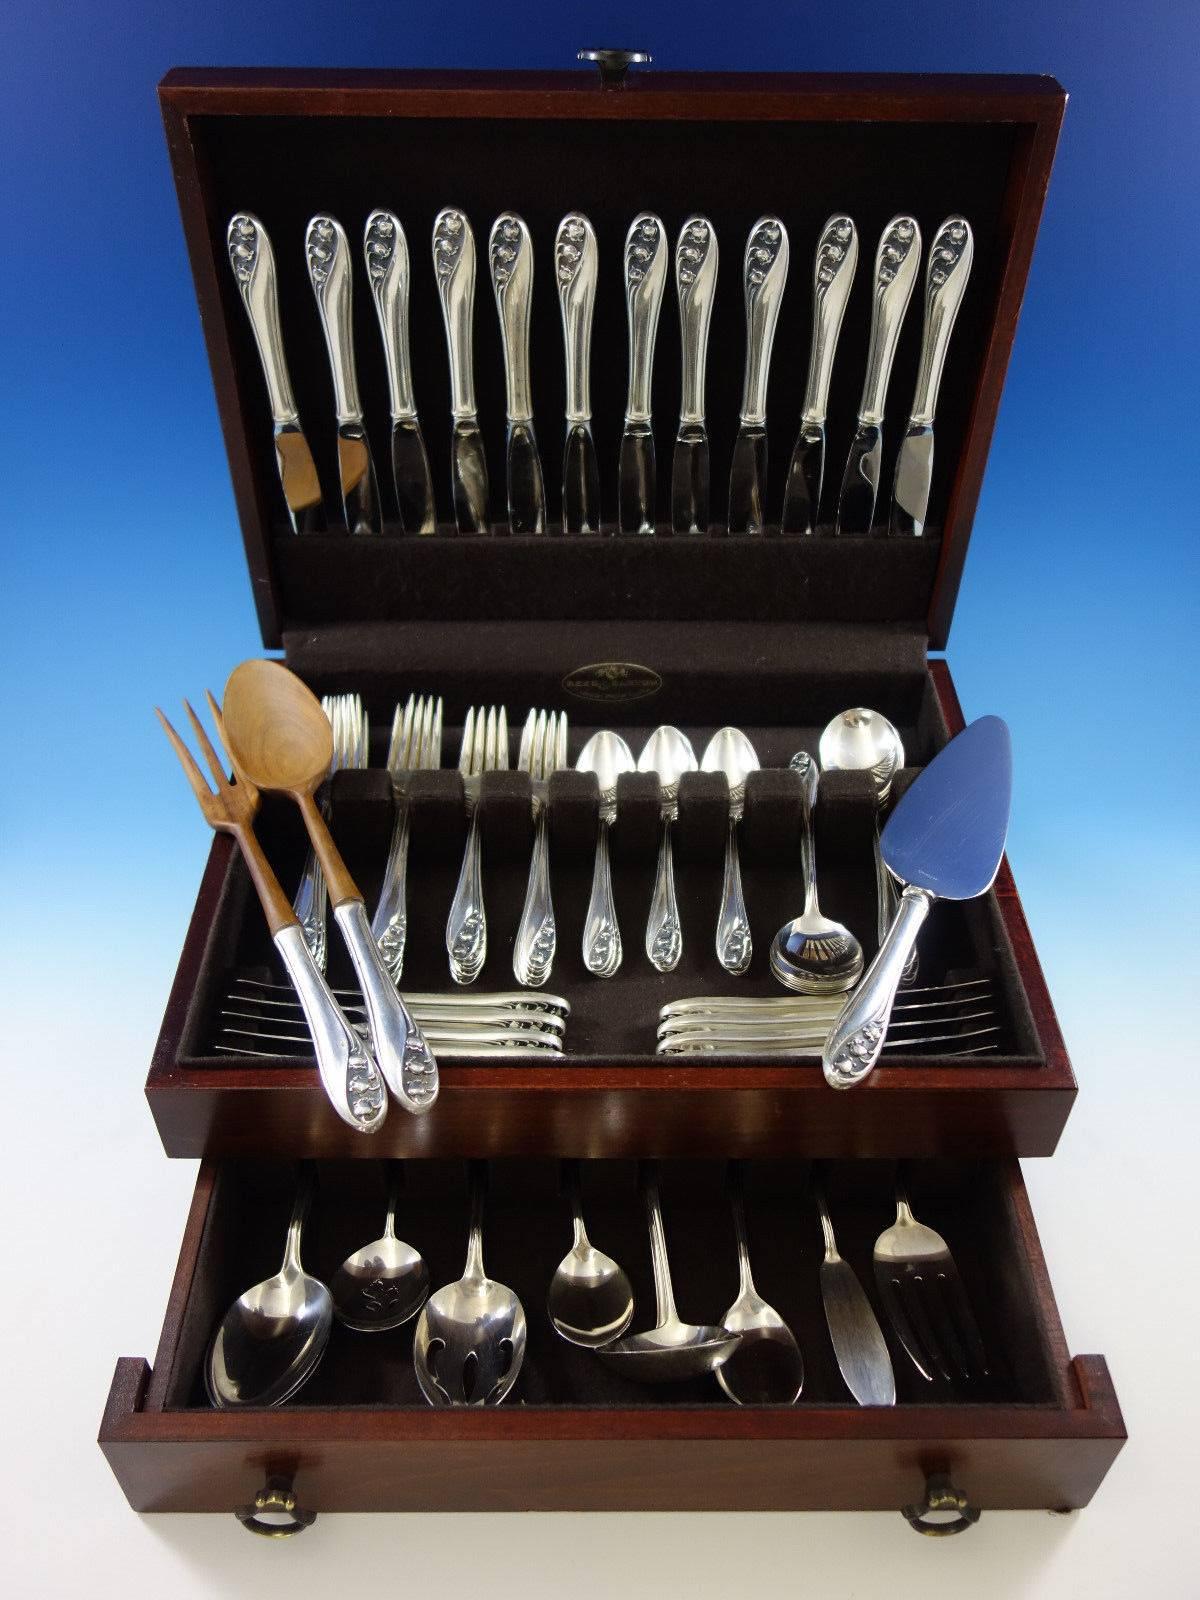 Lily of the valley by Gorham sterling silver flatware set, 85 pieces. This set includes: 

12 knives, 8 7/8